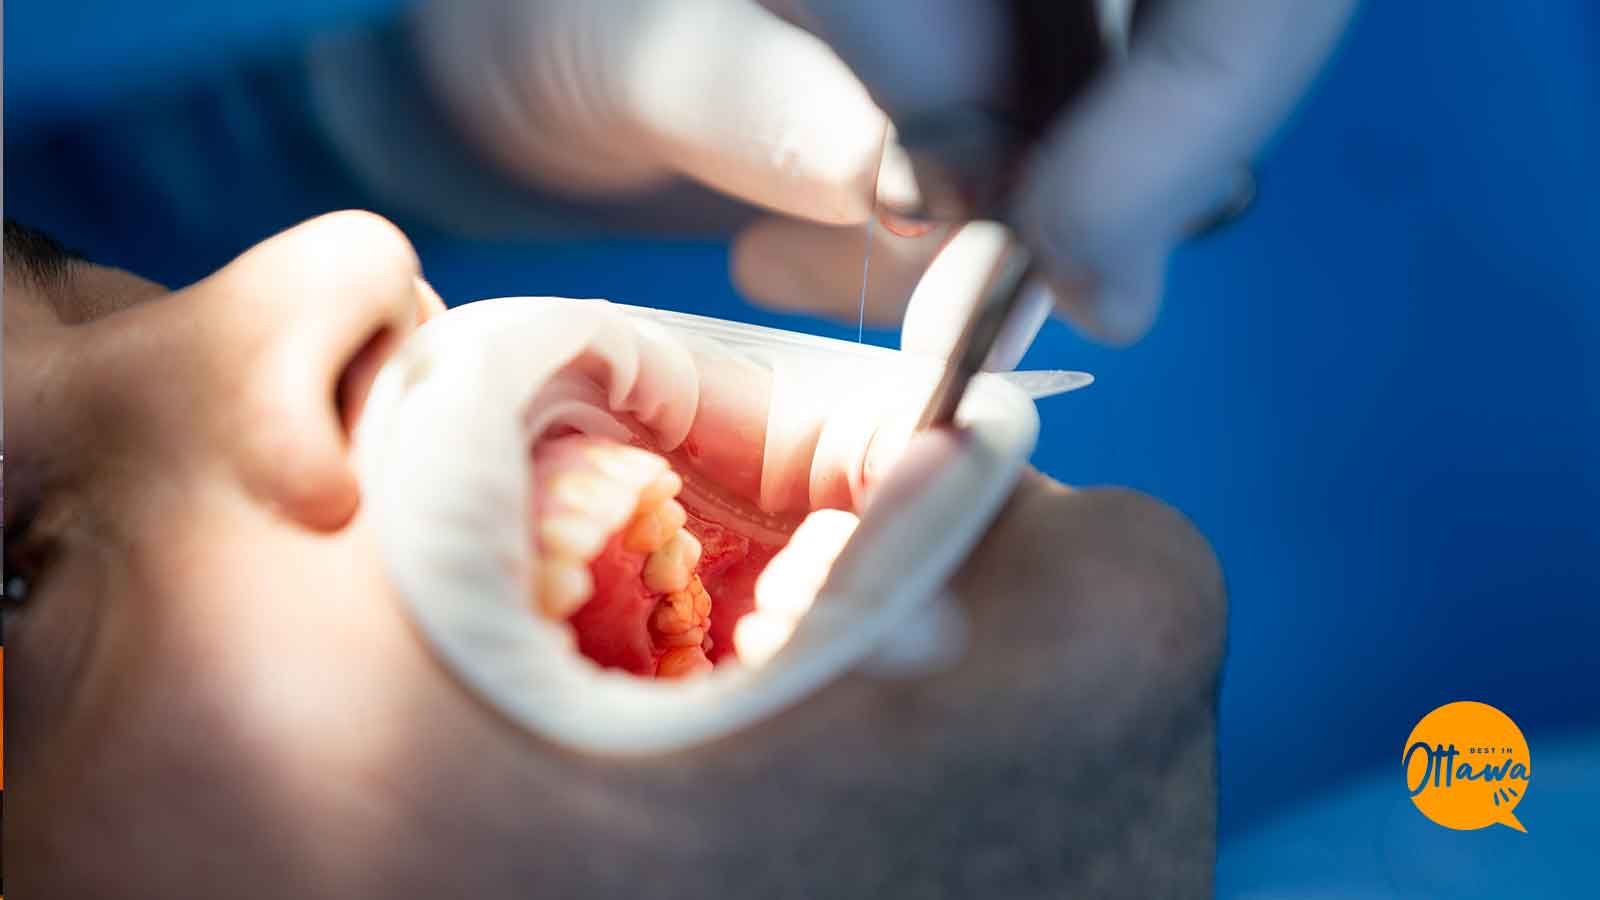 Downtown Dental Clinic: Transform Your Smile With Invisalign In Ottawa's Heart - TIMES OF RISING